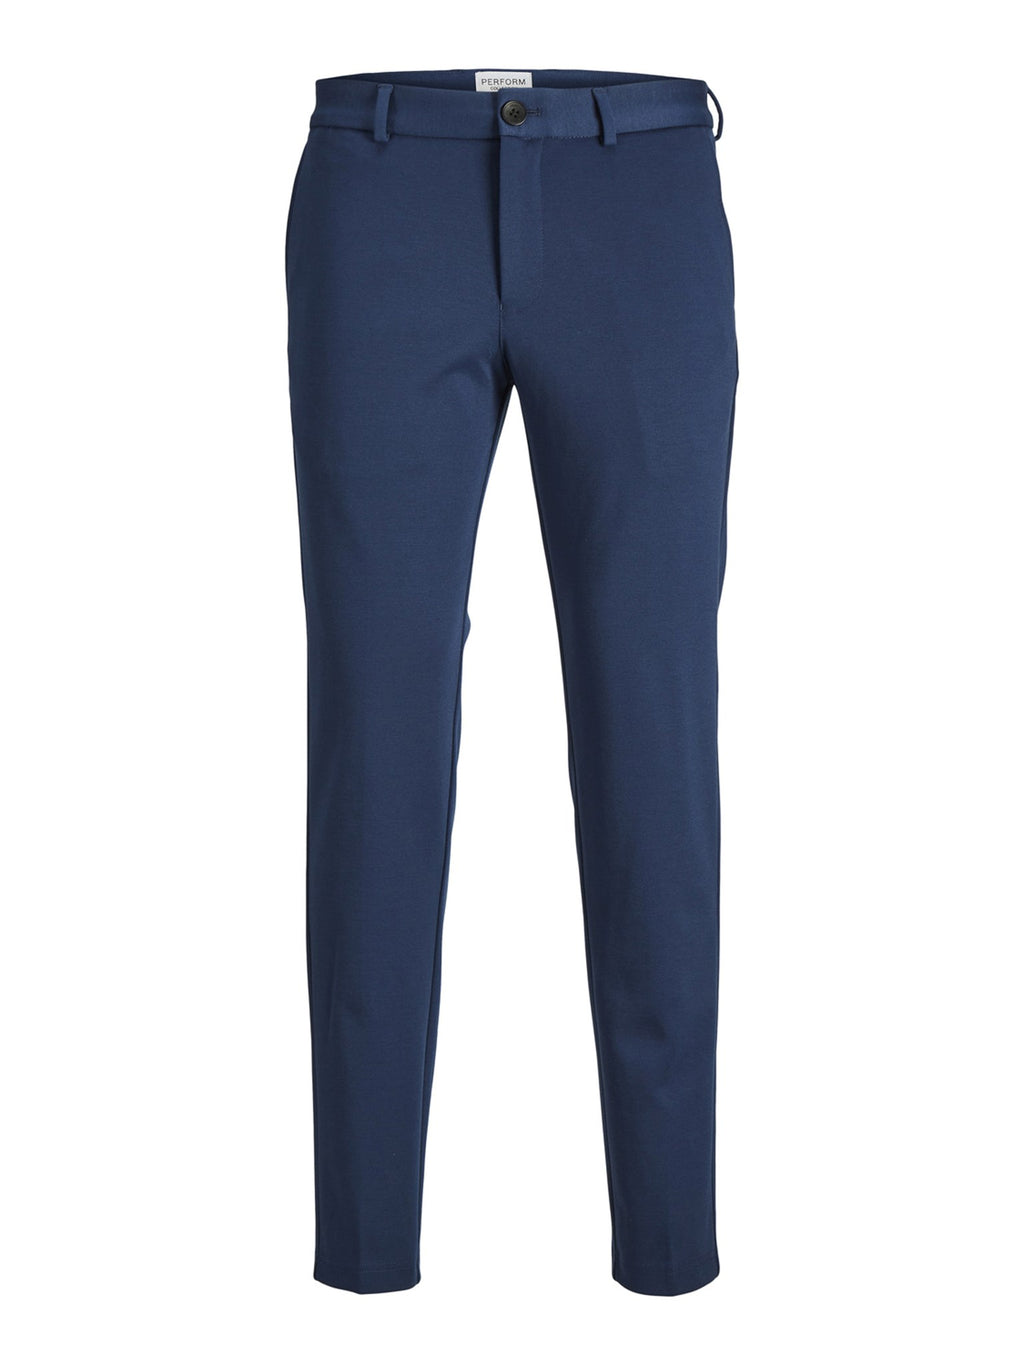 Performance Trousers - Blue